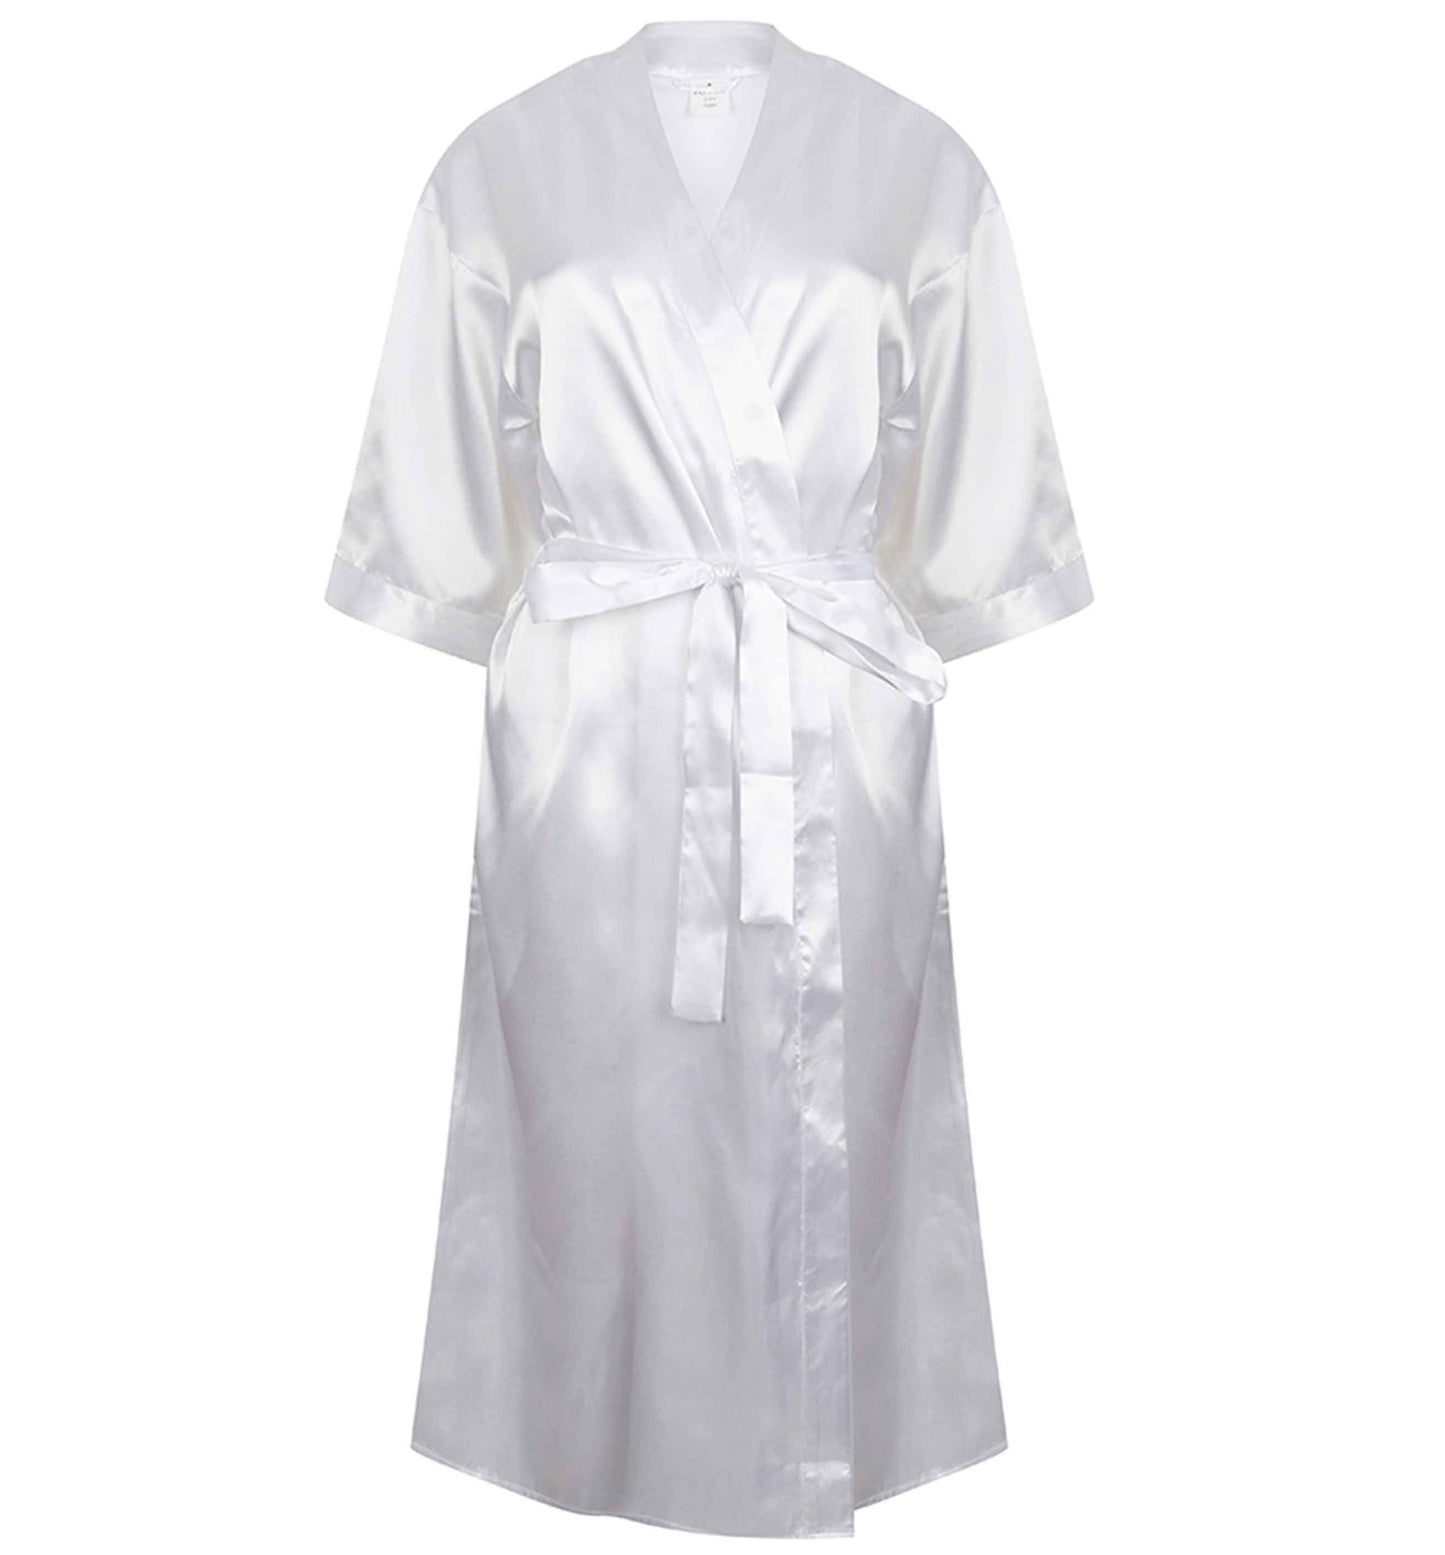 We're getting married finally! | 8-18 | Kimono style satin robe | Ladies dressing gown